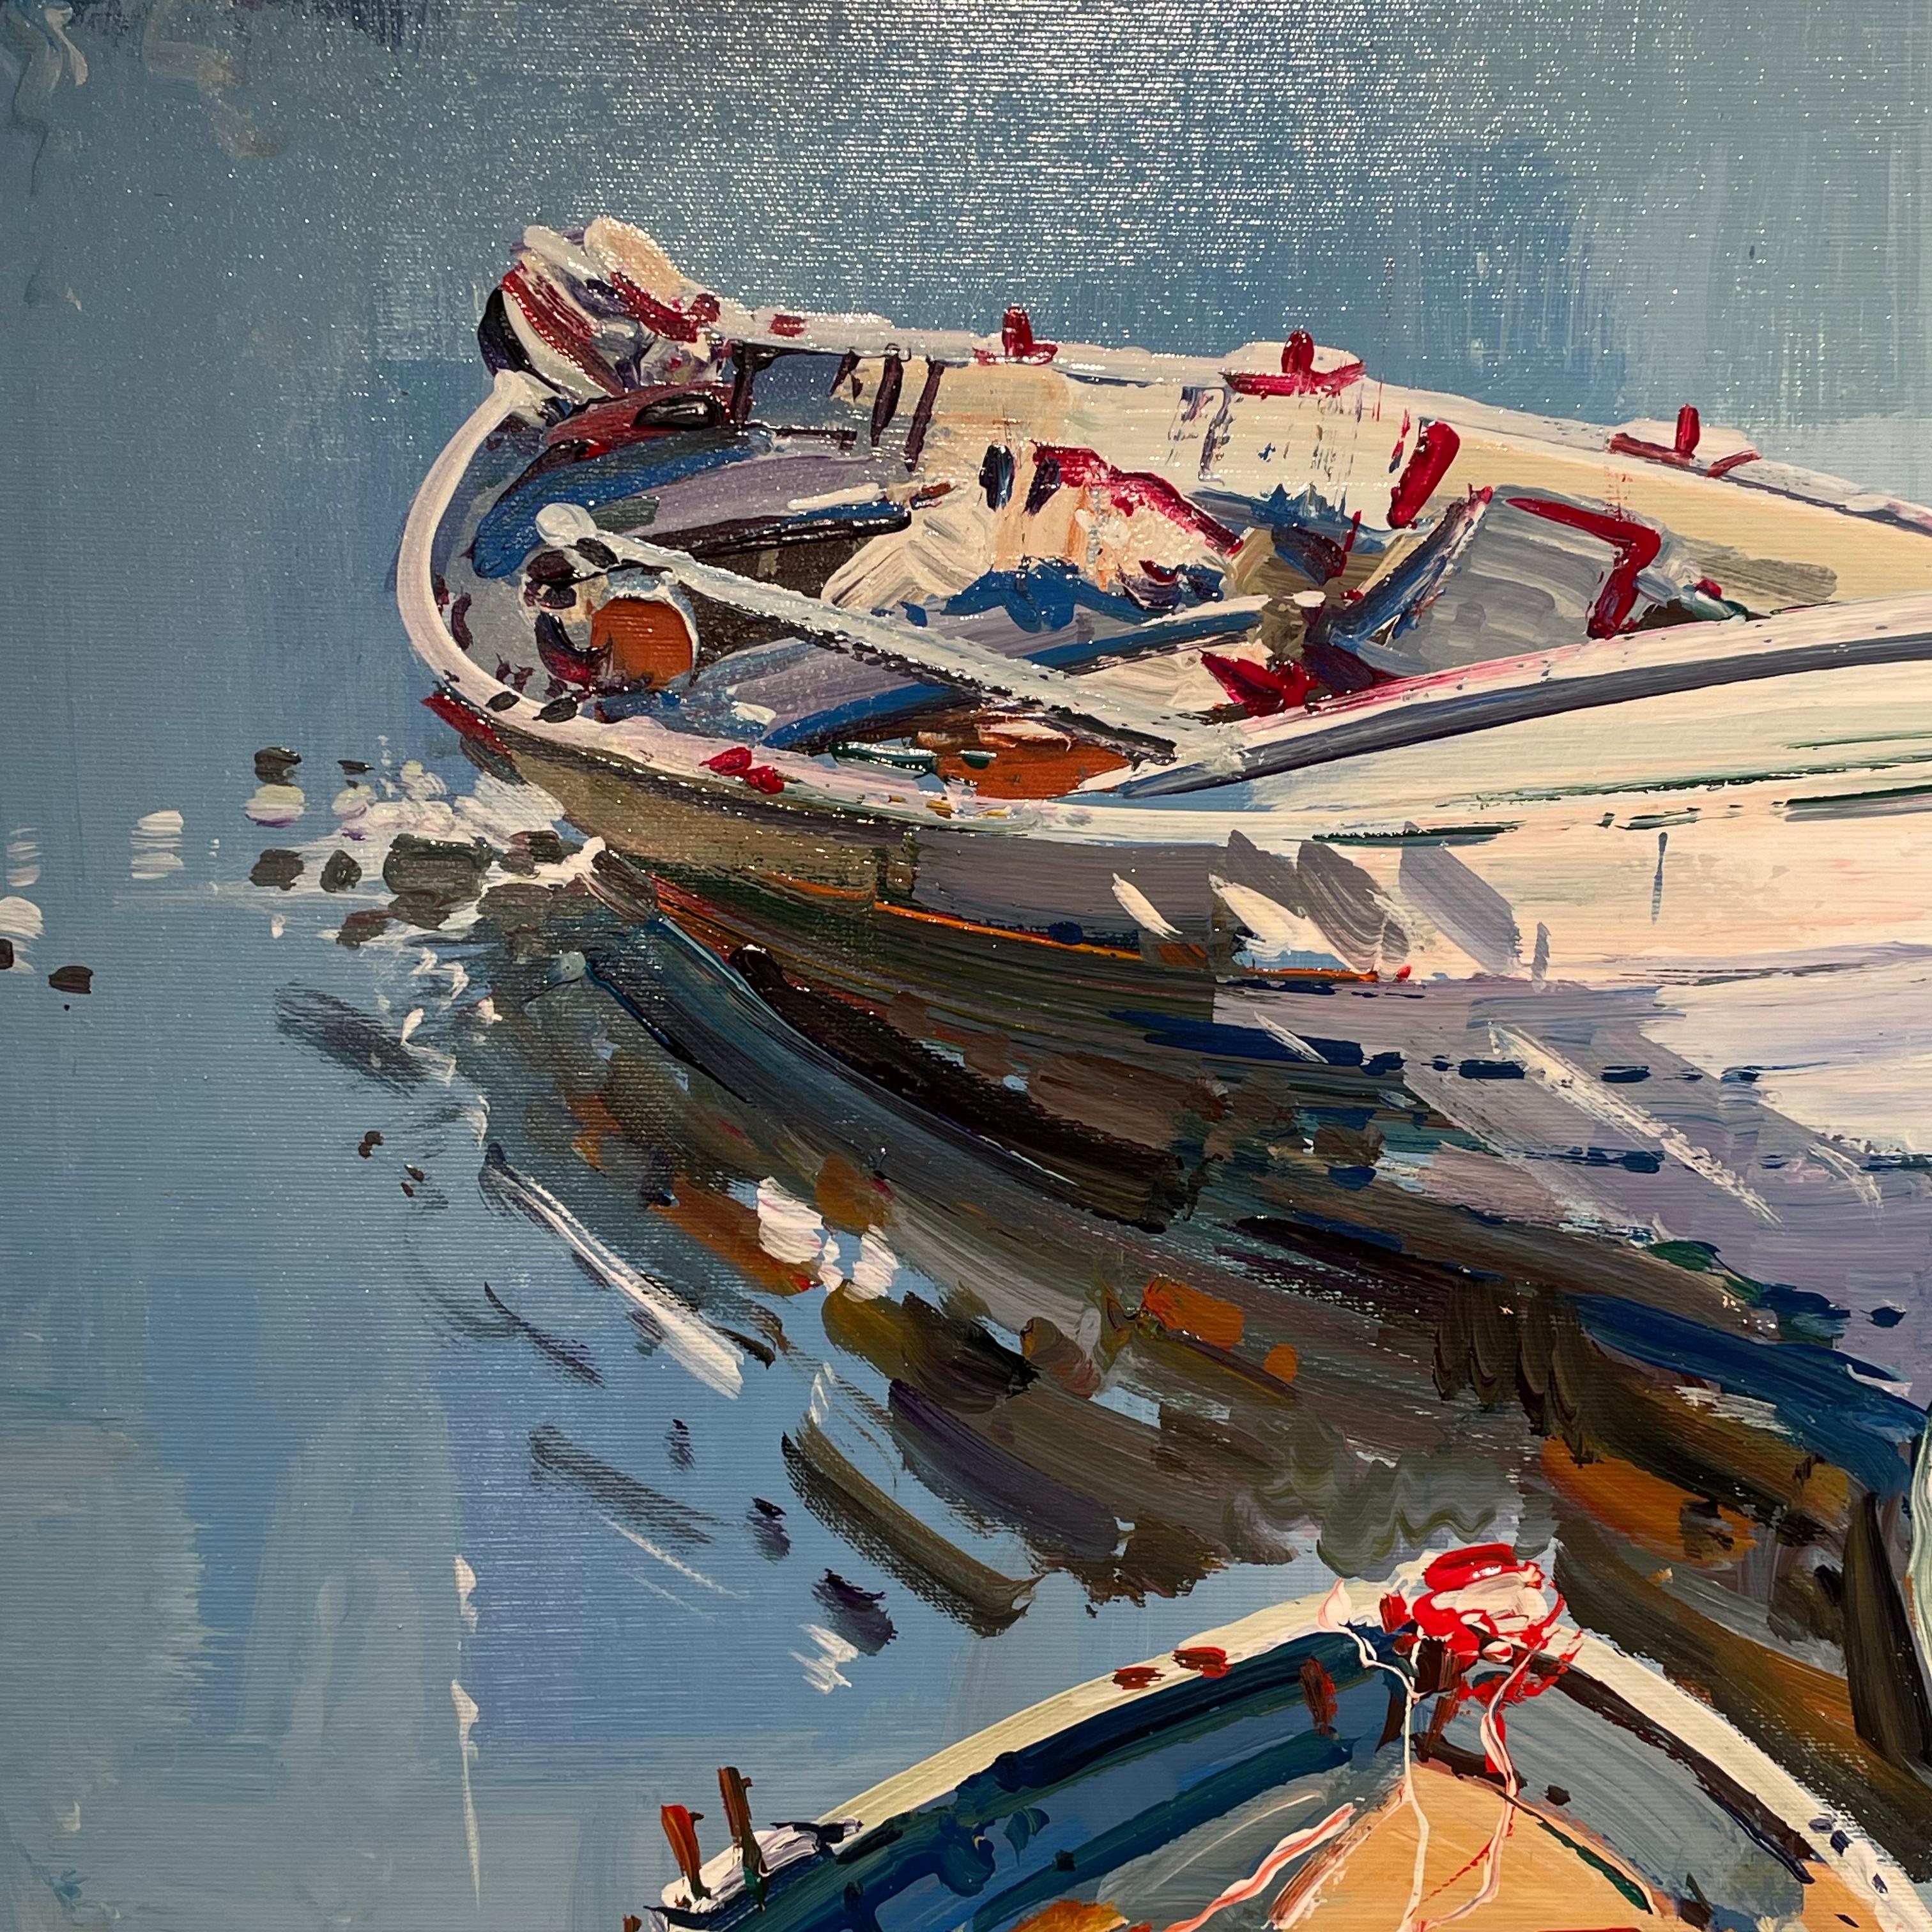 'All Tied Up' Colourful Contemporary Painting of boats & Water, Blue, red, white - Gray Landscape Painting by Francisco Santana 